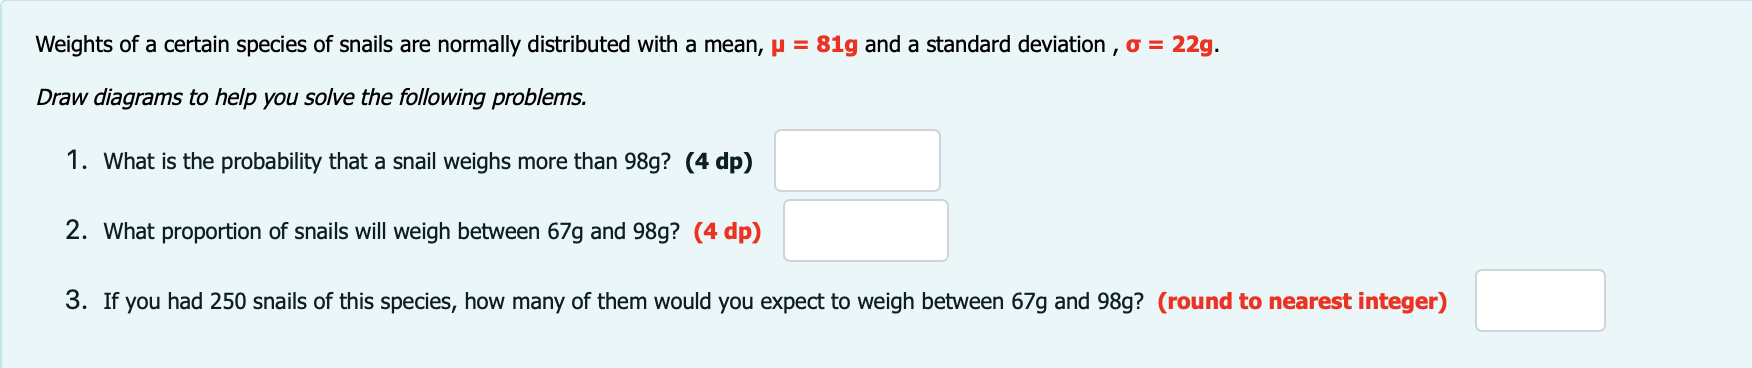 Weights Of A Certain Species Of Snails Are Normally Distributed With A Mean Y 81g And A Standard Deviation O 22g 1